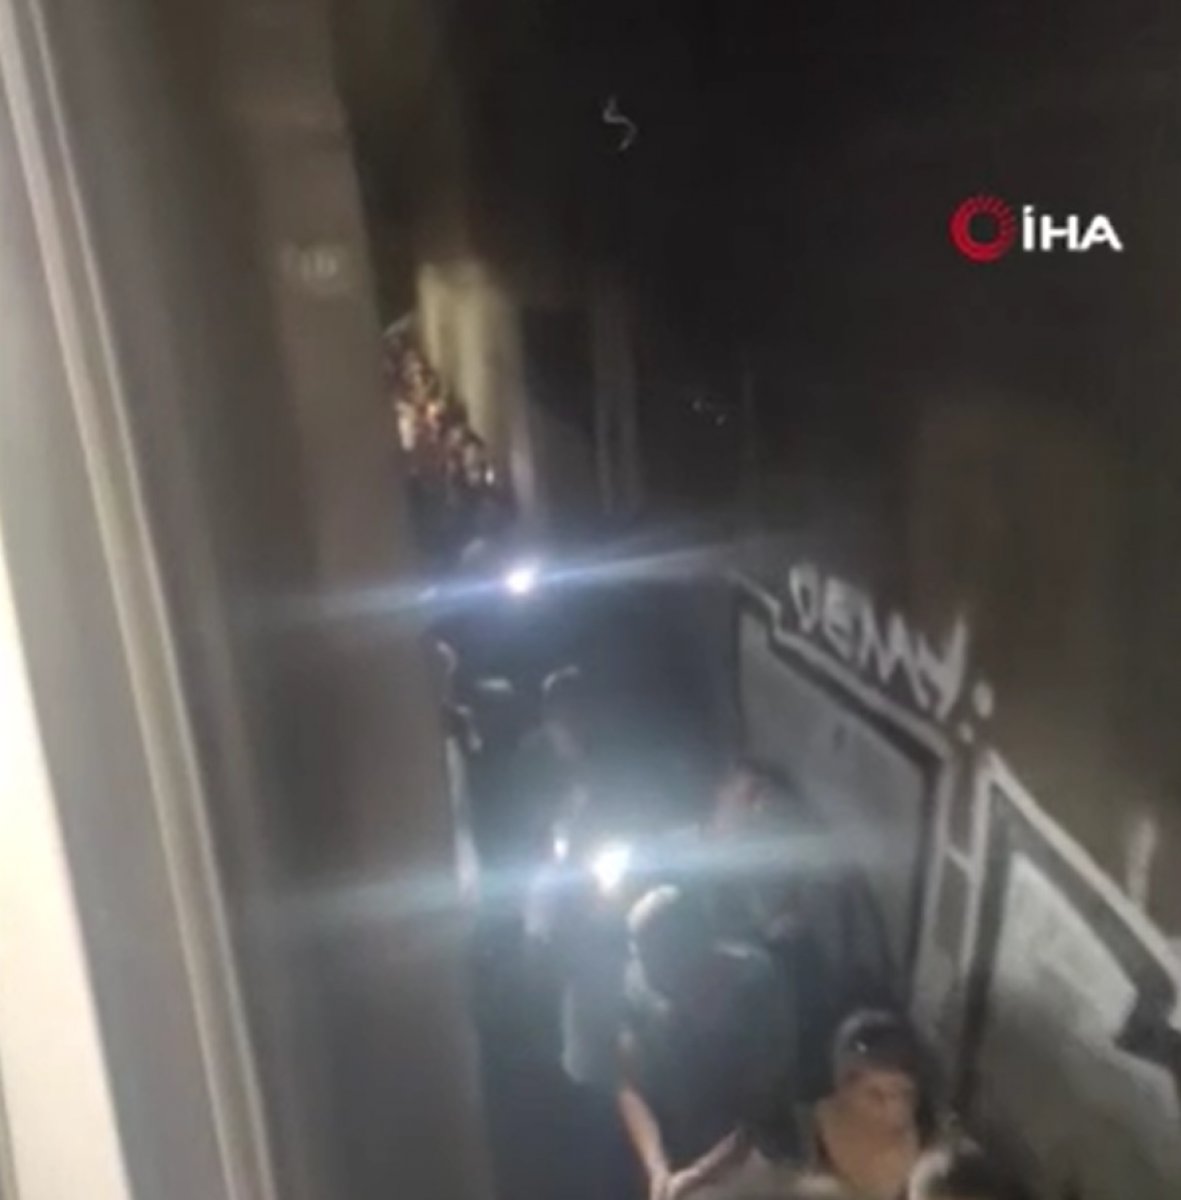 Train services were disrupted in Paris, the people were trapped in the tunnel #2